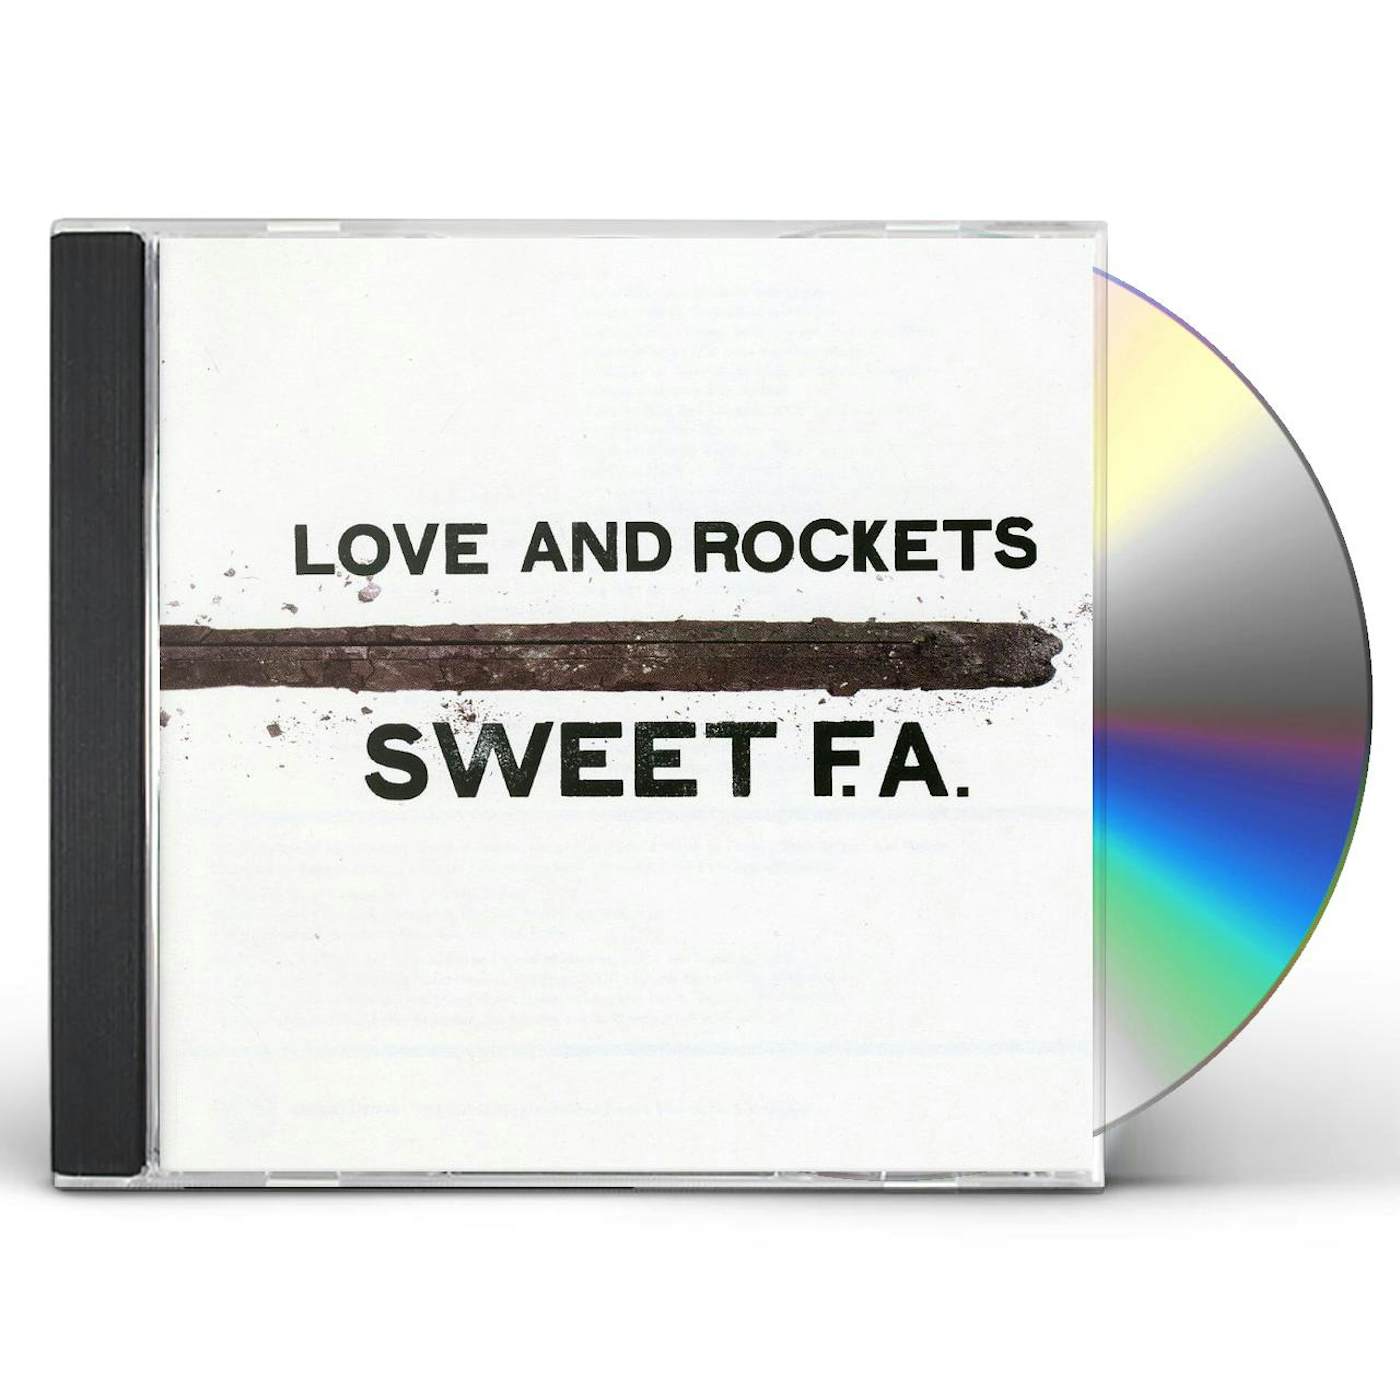 Love and Rockets SWEET F.A. CD